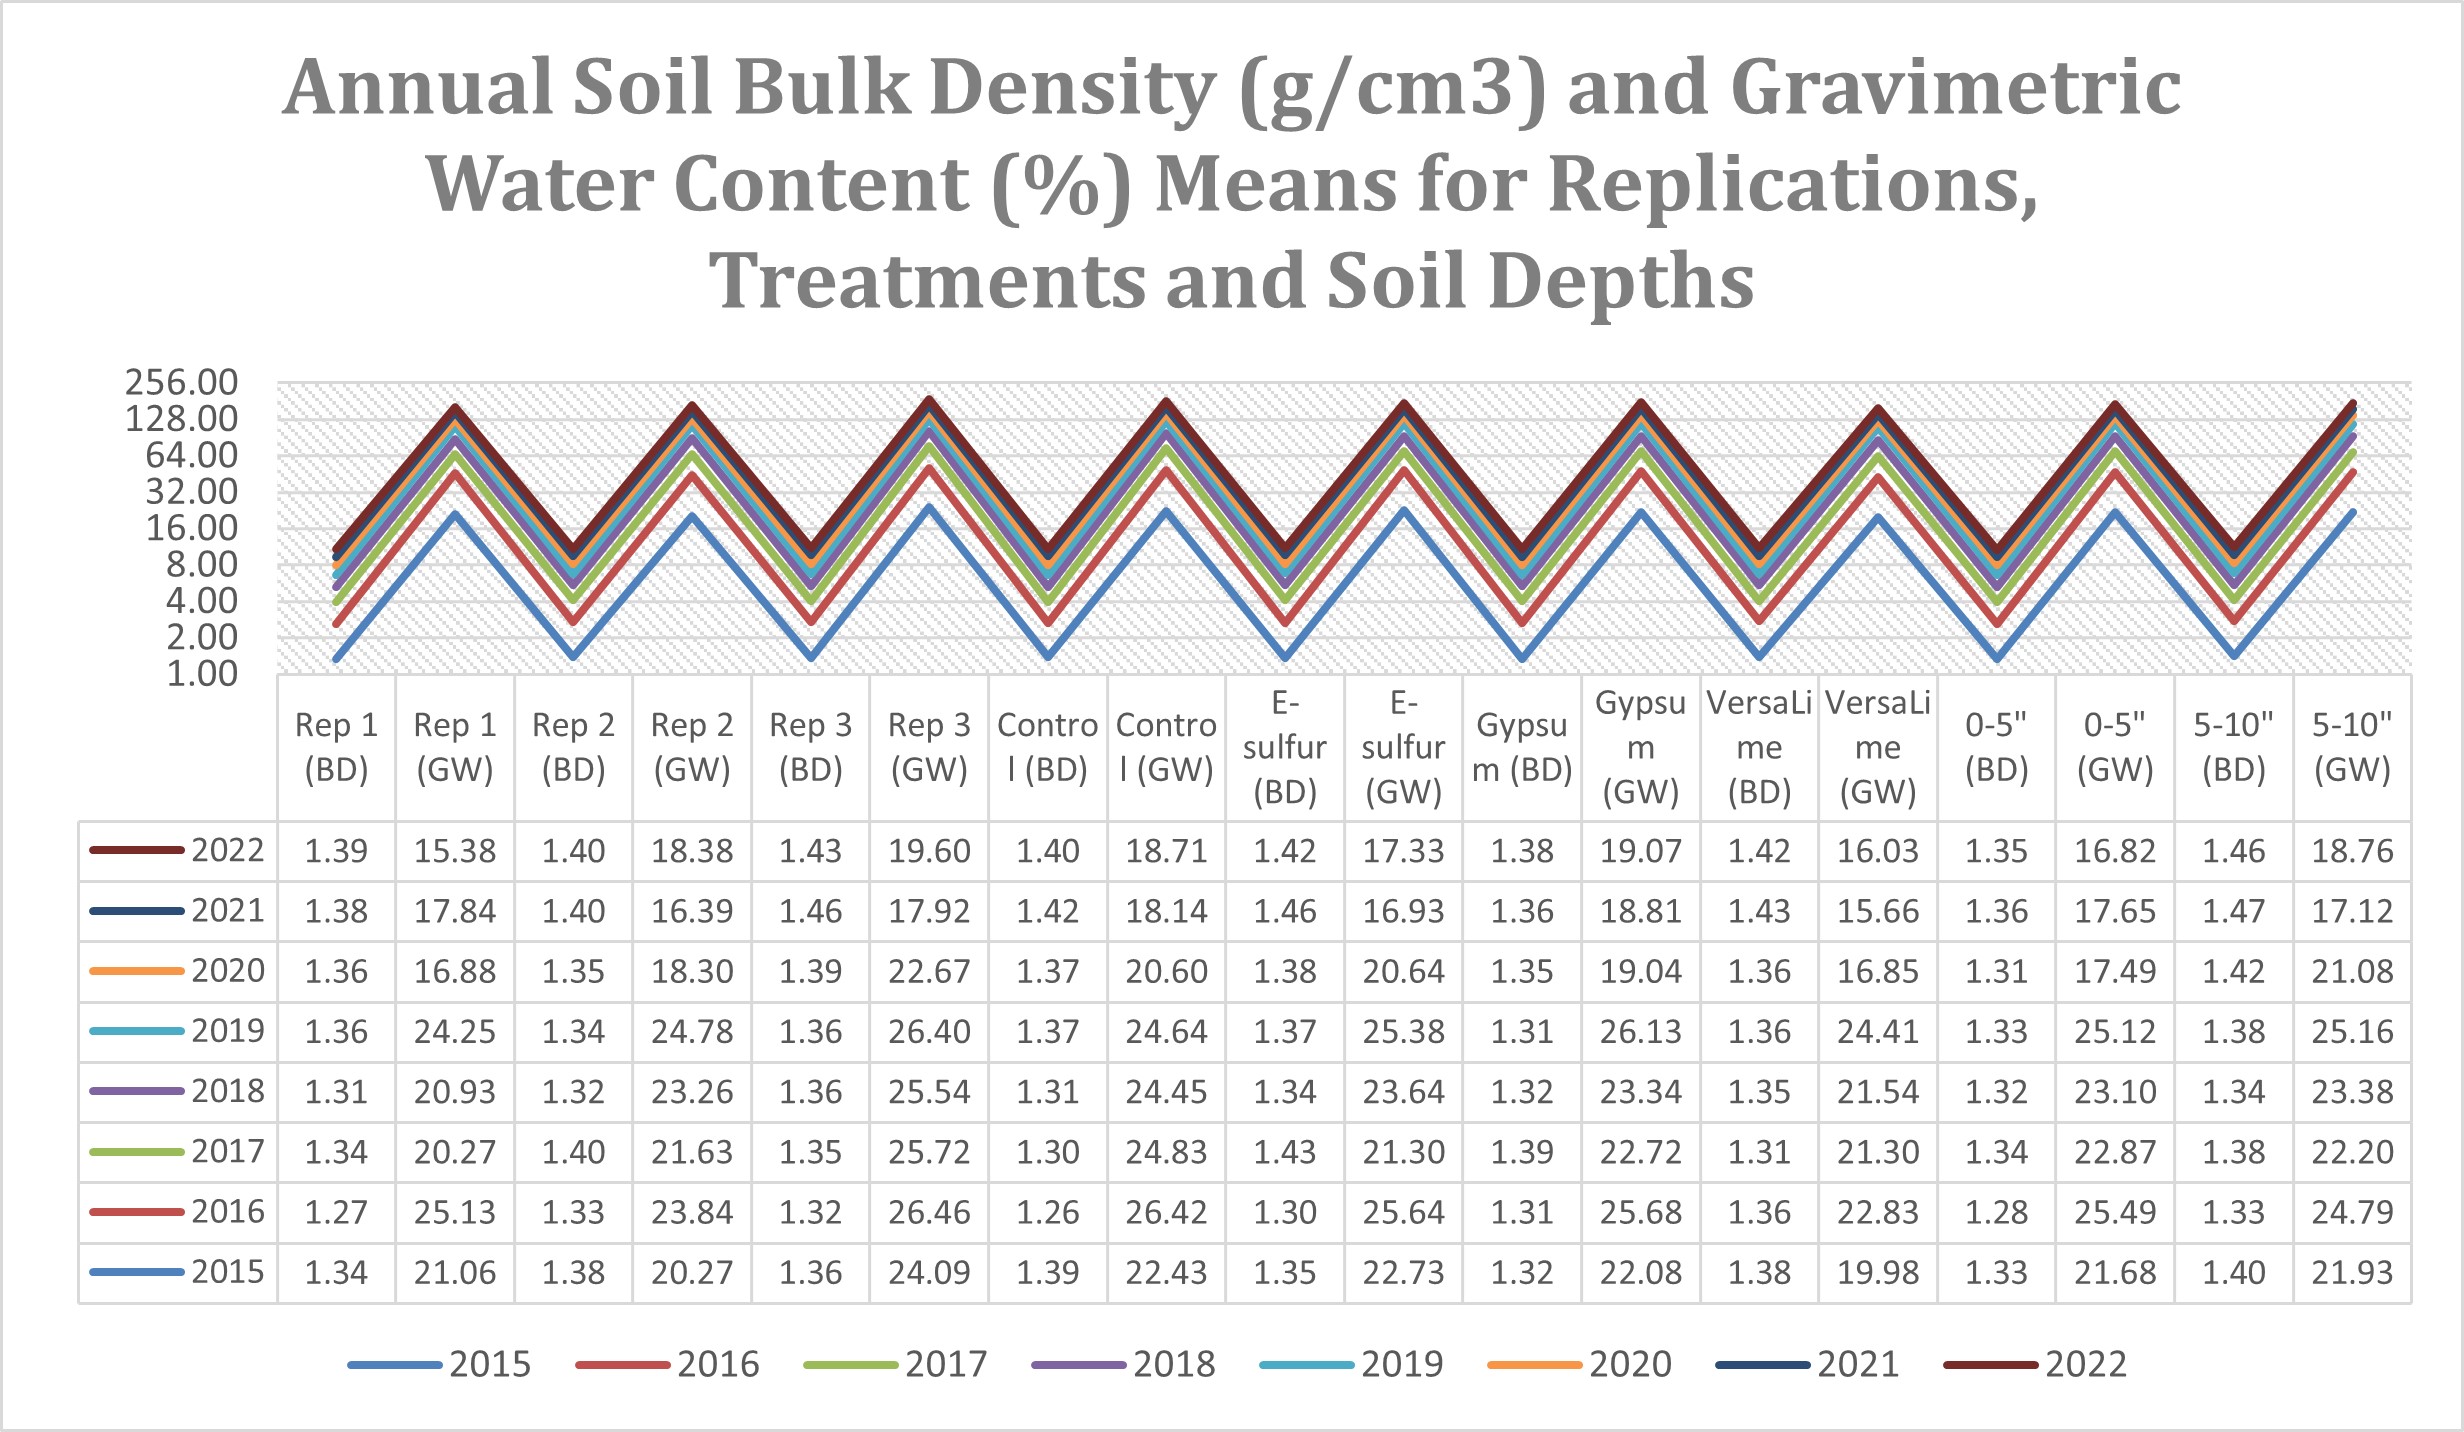 Annual Soil Bulk Density (g/cm3) and Gravimetric Water Content (%) Means for Replications, Treatments and Soil Depths 2015-2022